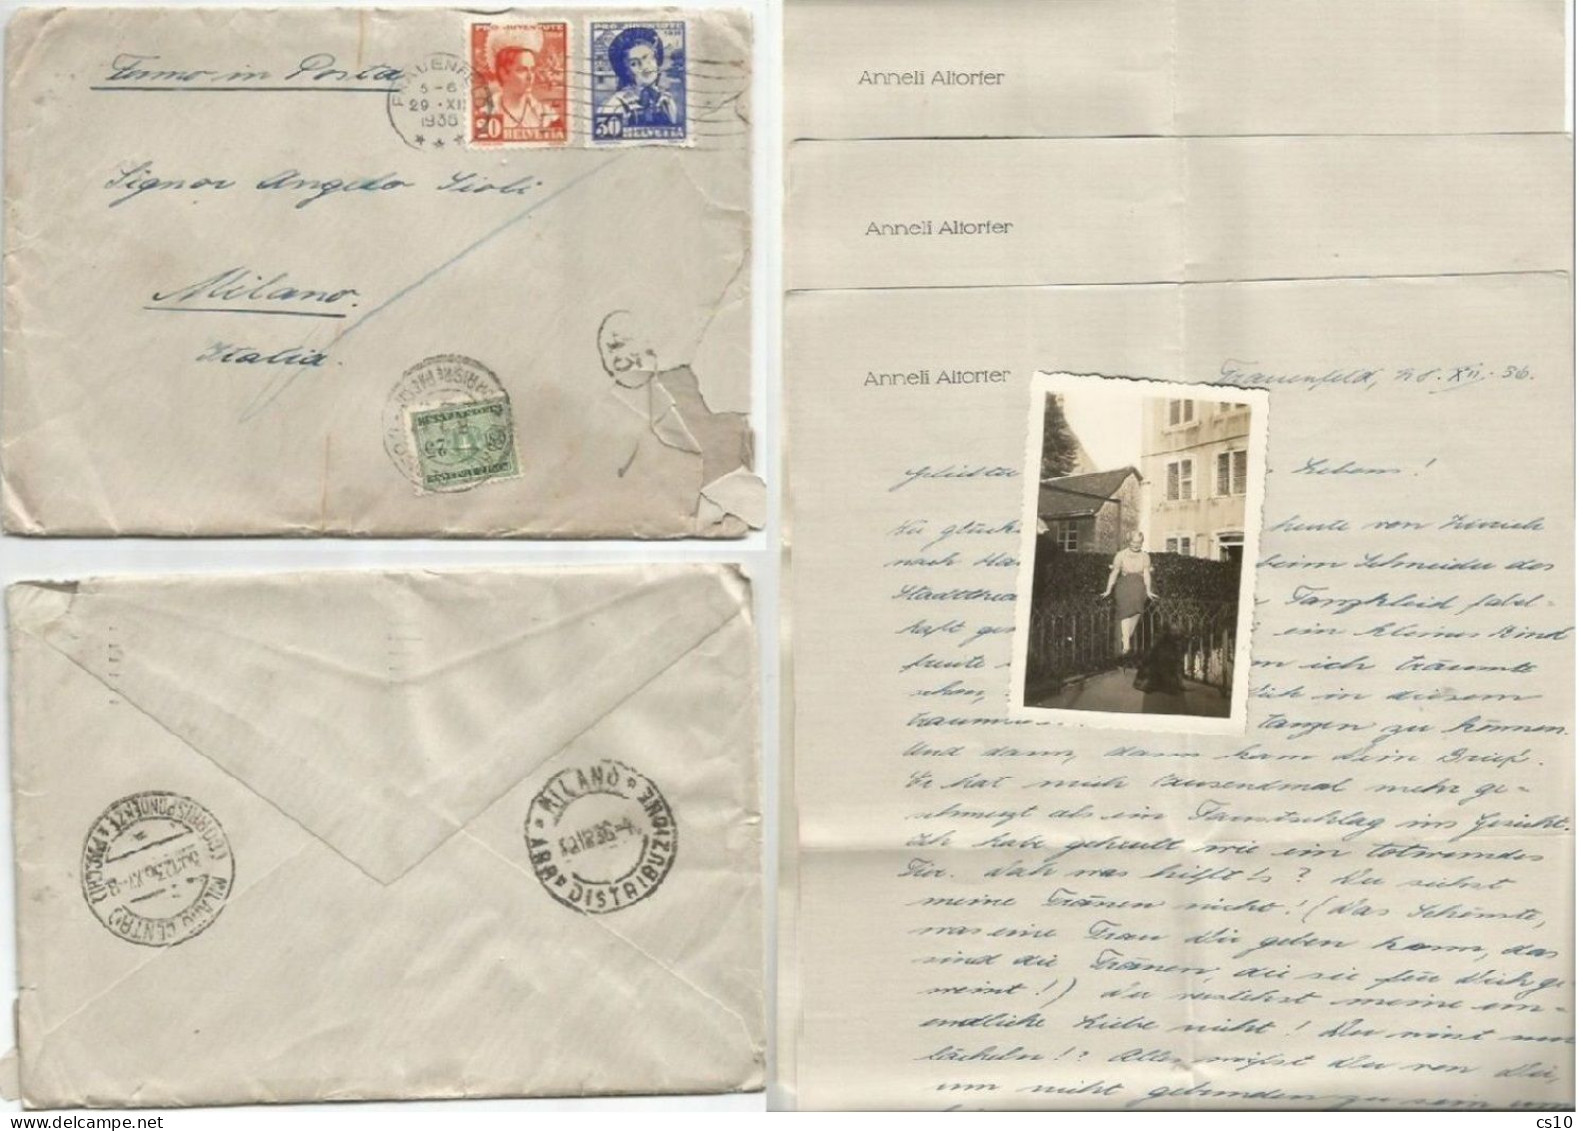 Suisse Frauenfeld 29dec1936 To Italy Fermo Posta Poste Restante With 2v PJ 1936 Taxed P.Due + Photo + 3 Pages Text - Portomarken